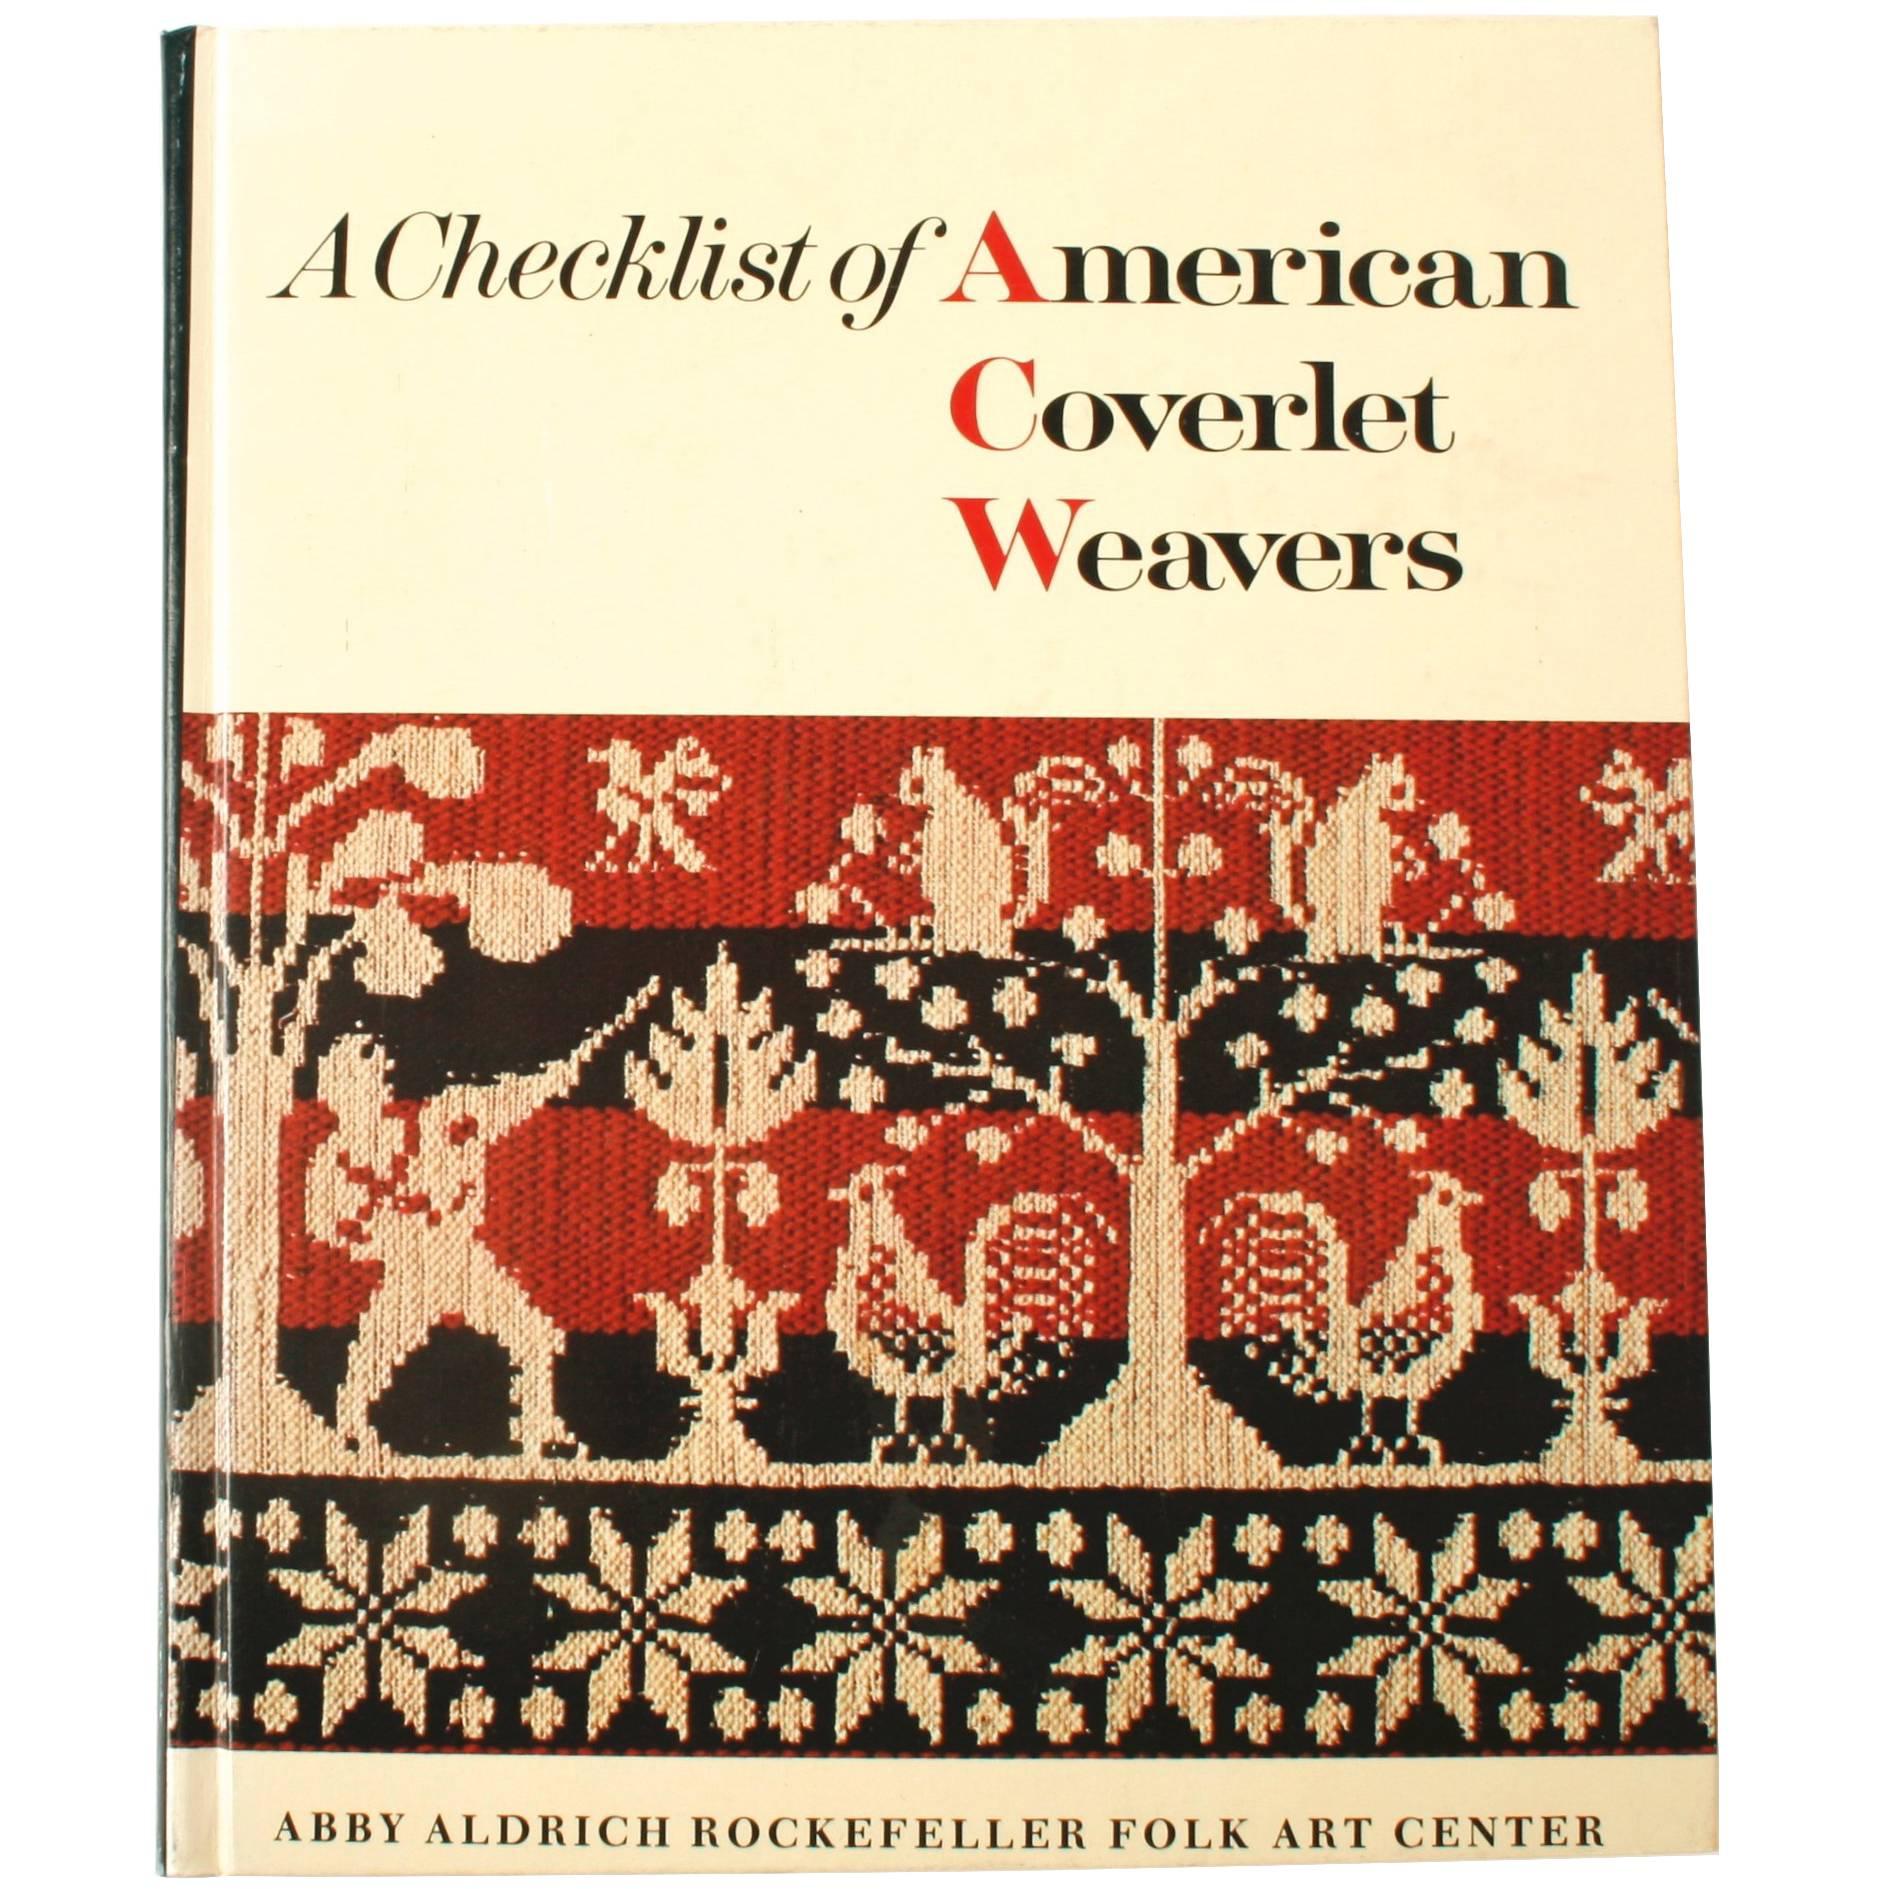 "A Checklist of American Coverlet Weavers" Book by John Heisey